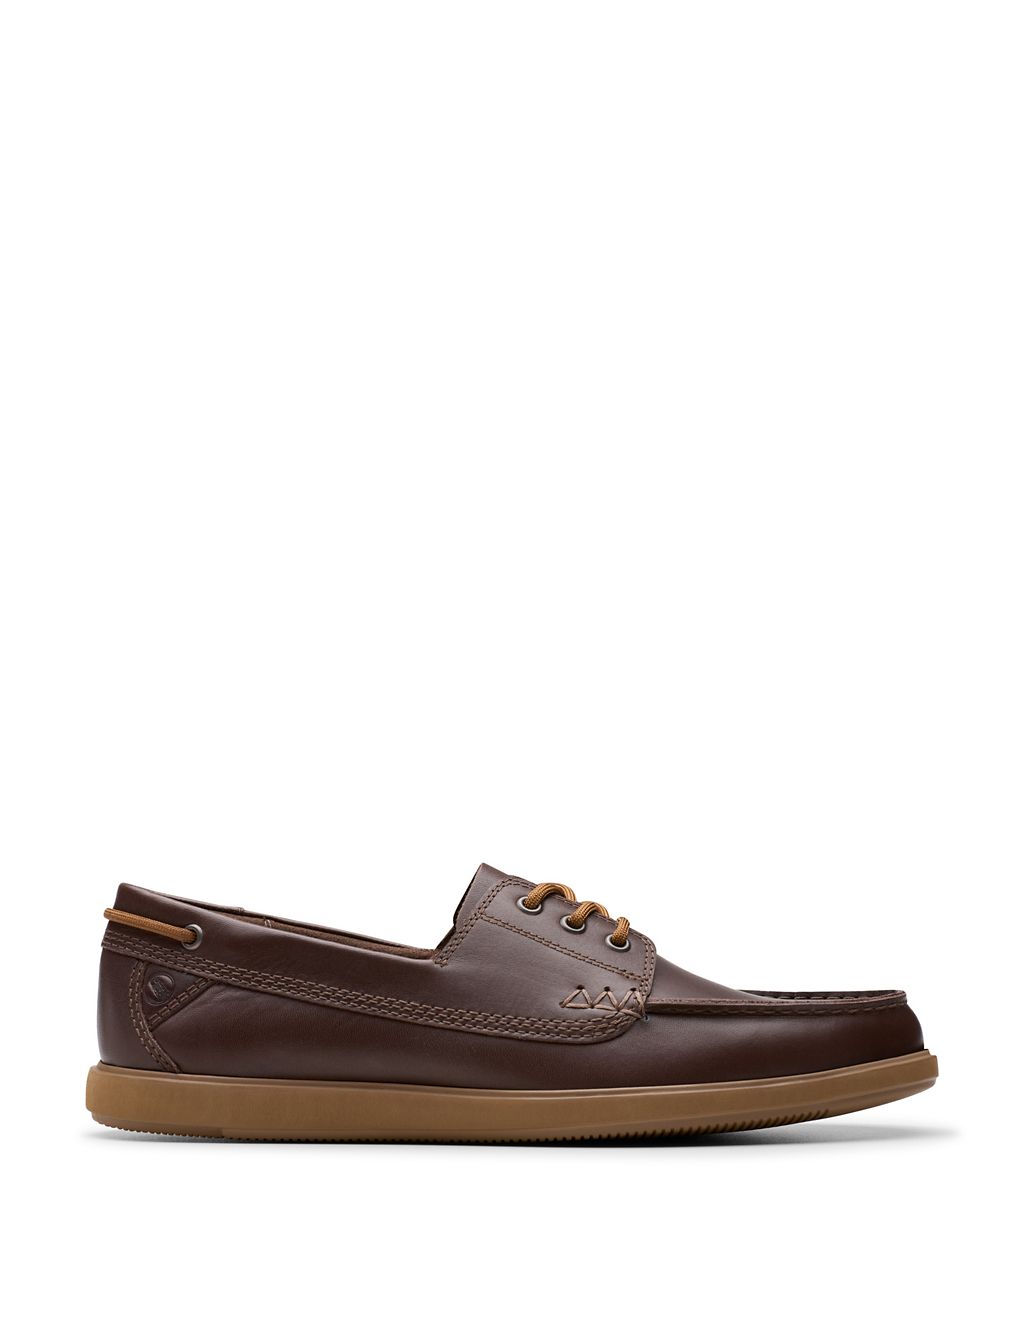 Leather Flat Boat Shoes 3 of 6